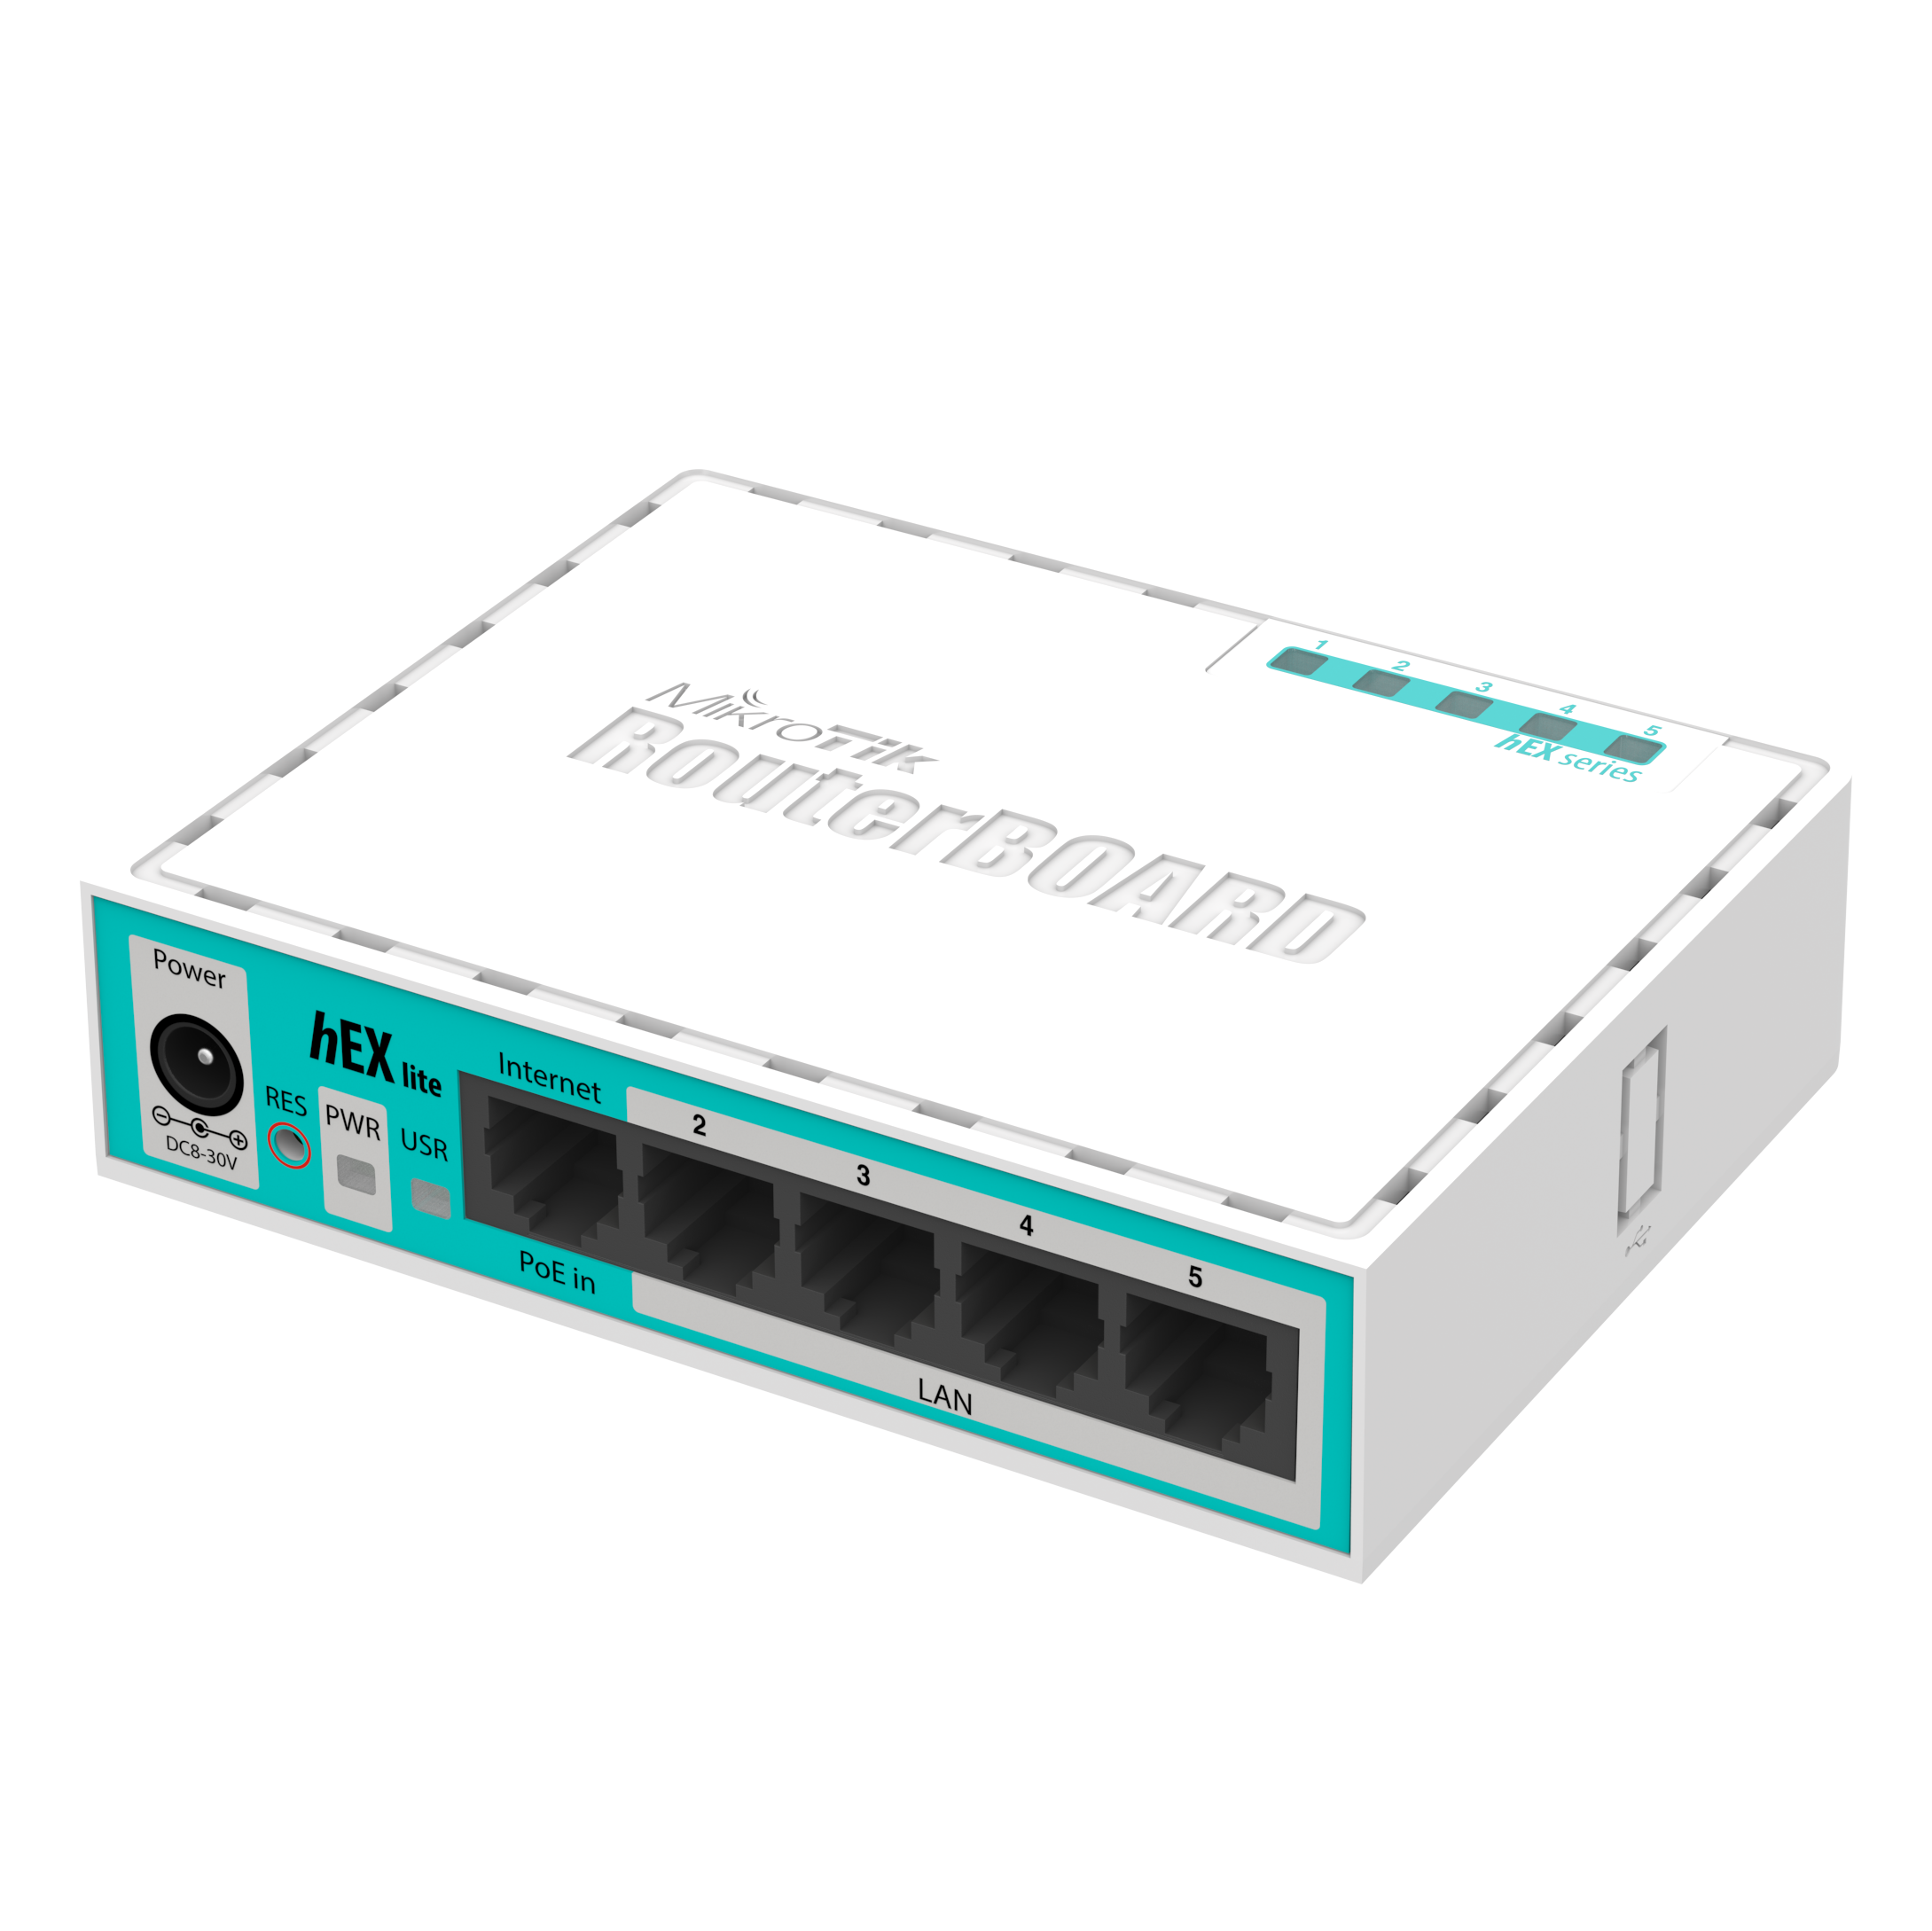 MikroTik Routers and Wireless - Products: hEX lite